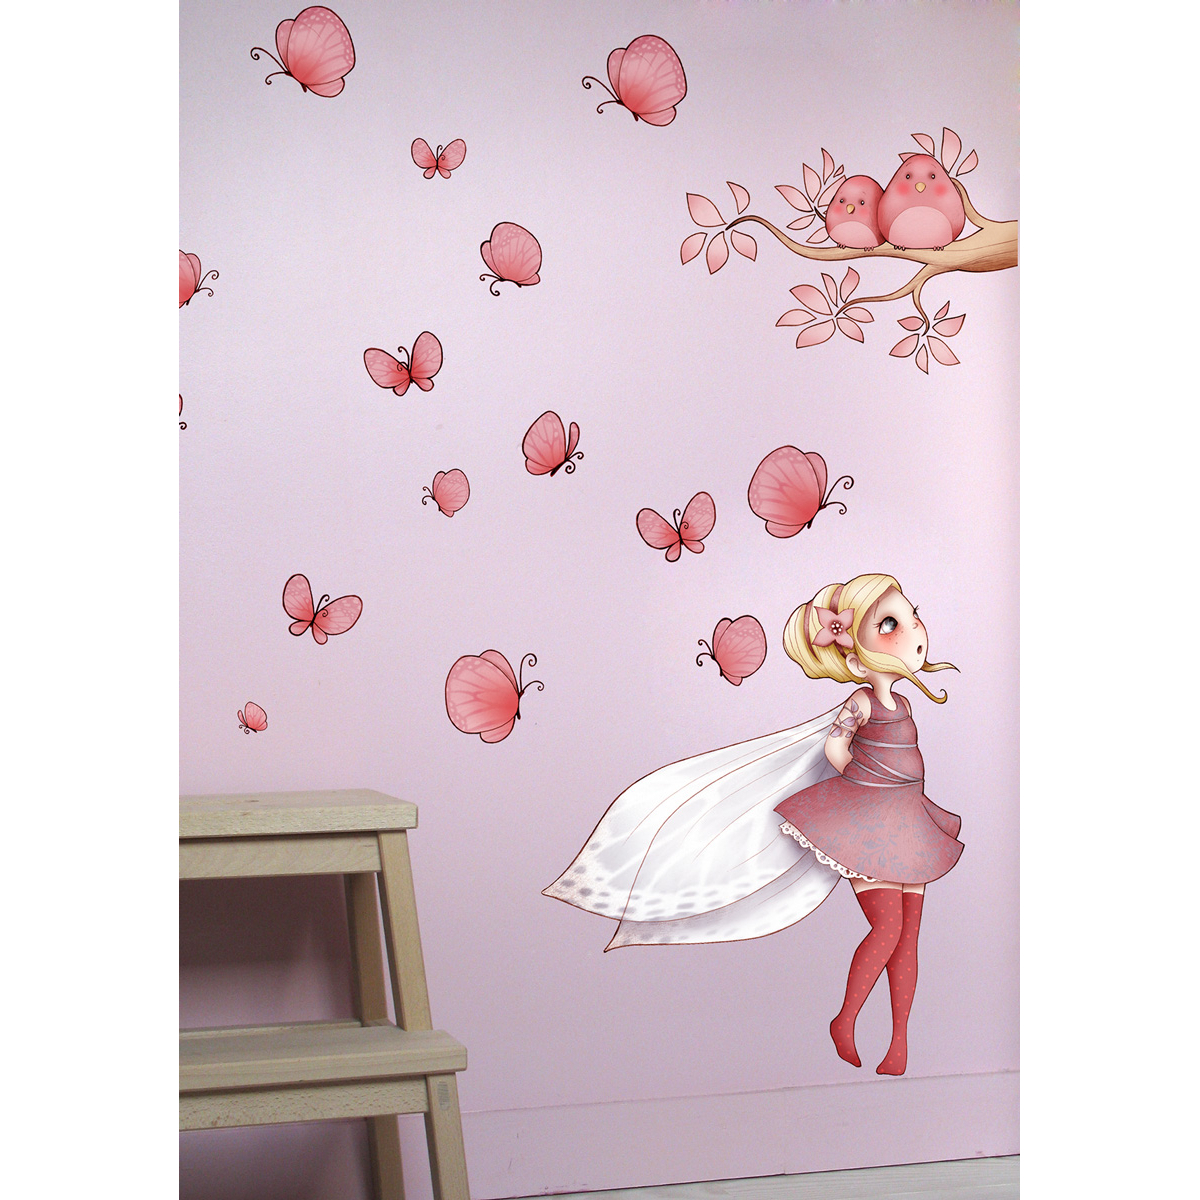 Stickers mural fee papillons - Sticker chambre enfant